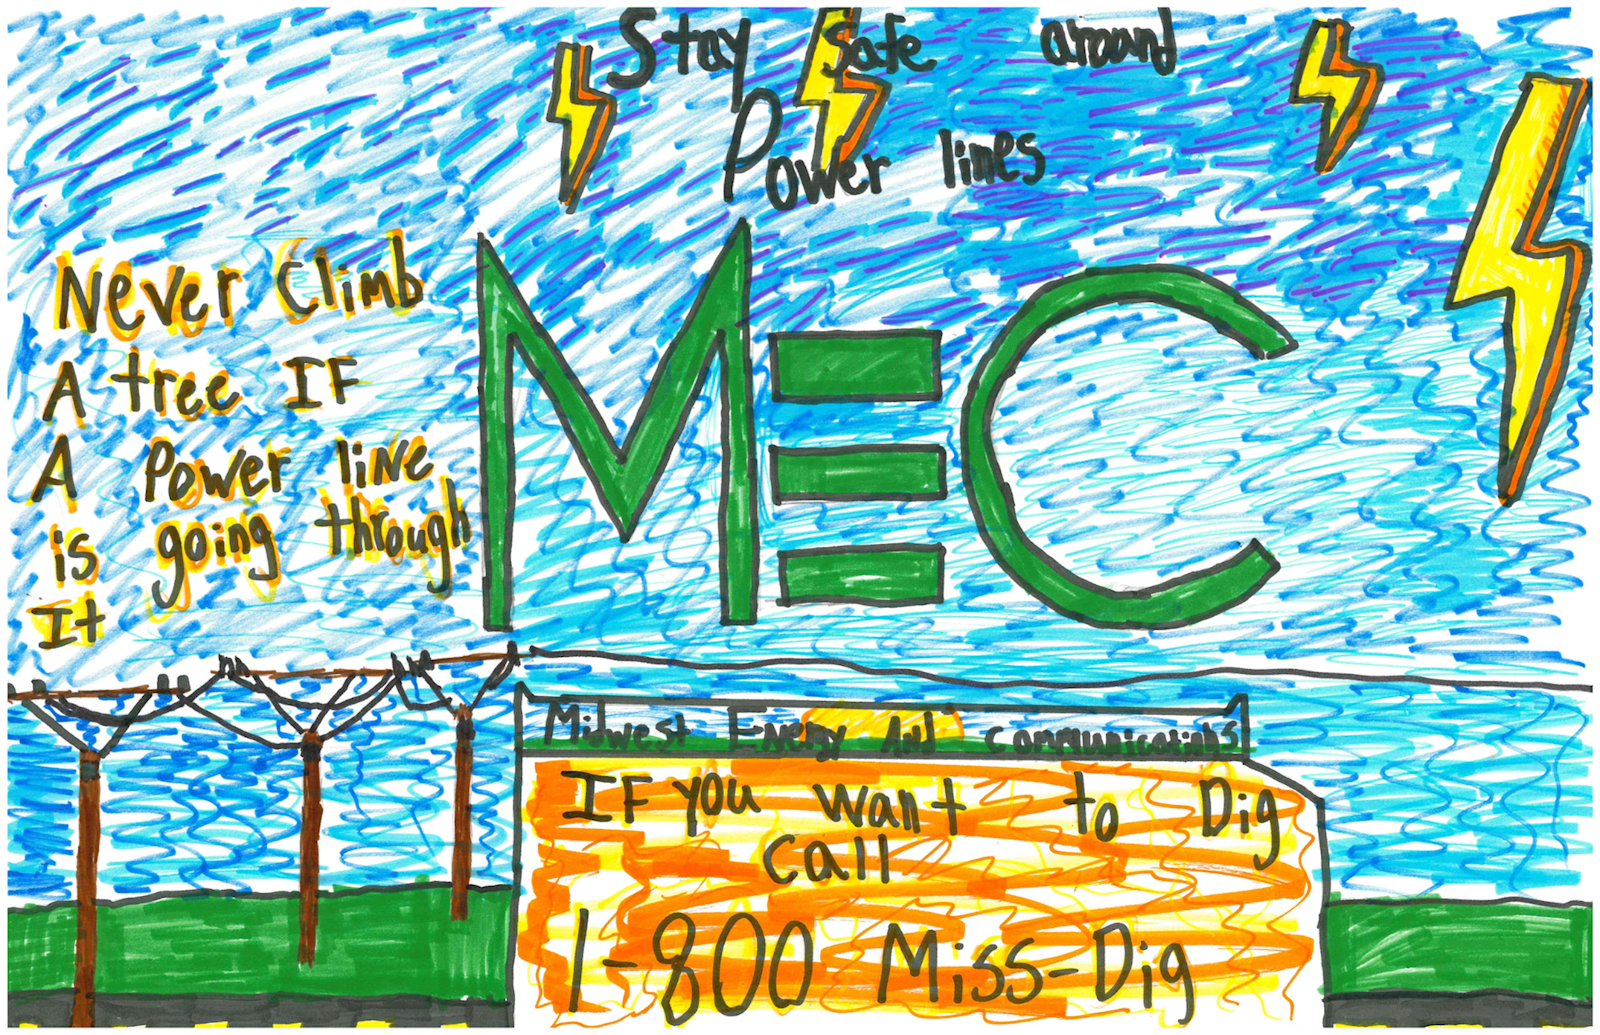 Poster by Jackson T., Centreville